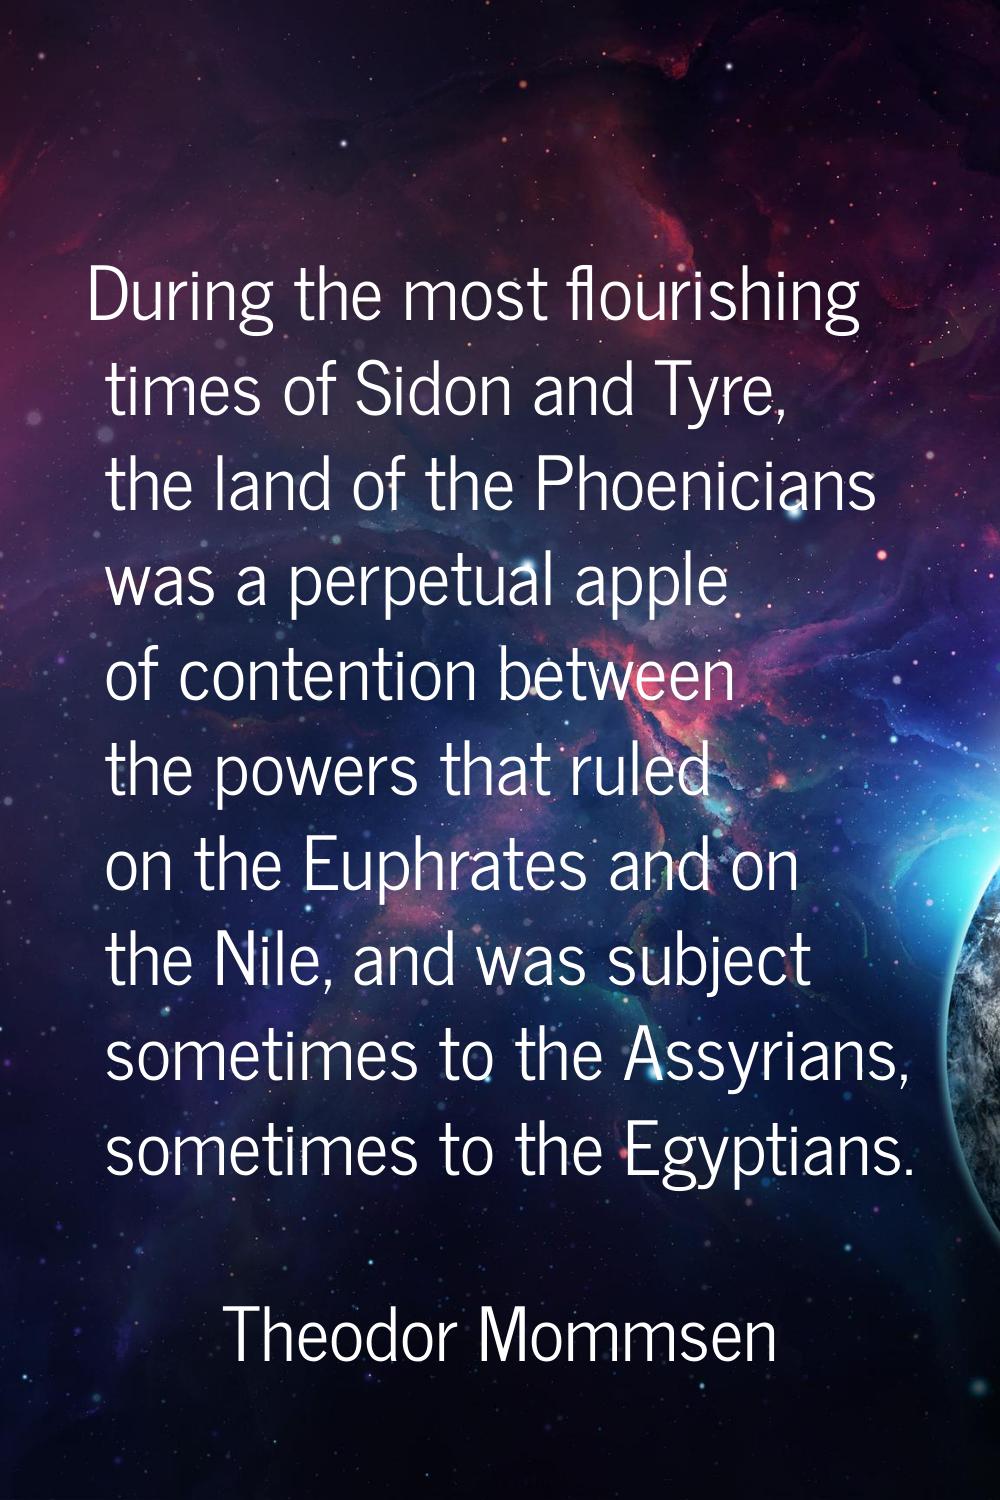 During the most flourishing times of Sidon and Tyre, the land of the Phoenicians was a perpetual ap